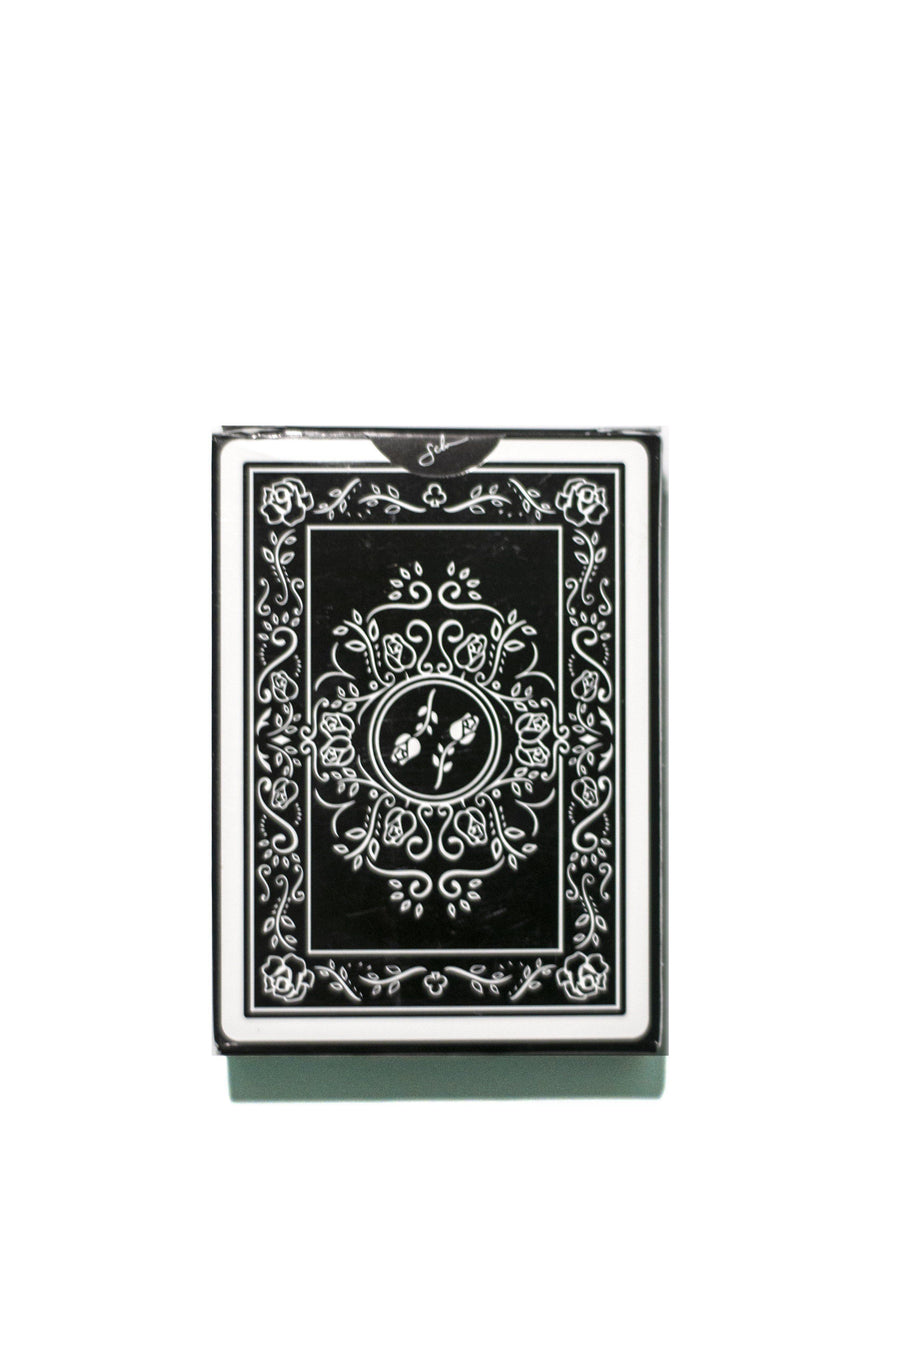 Black Roses Playing Cards by Daniel Schneider